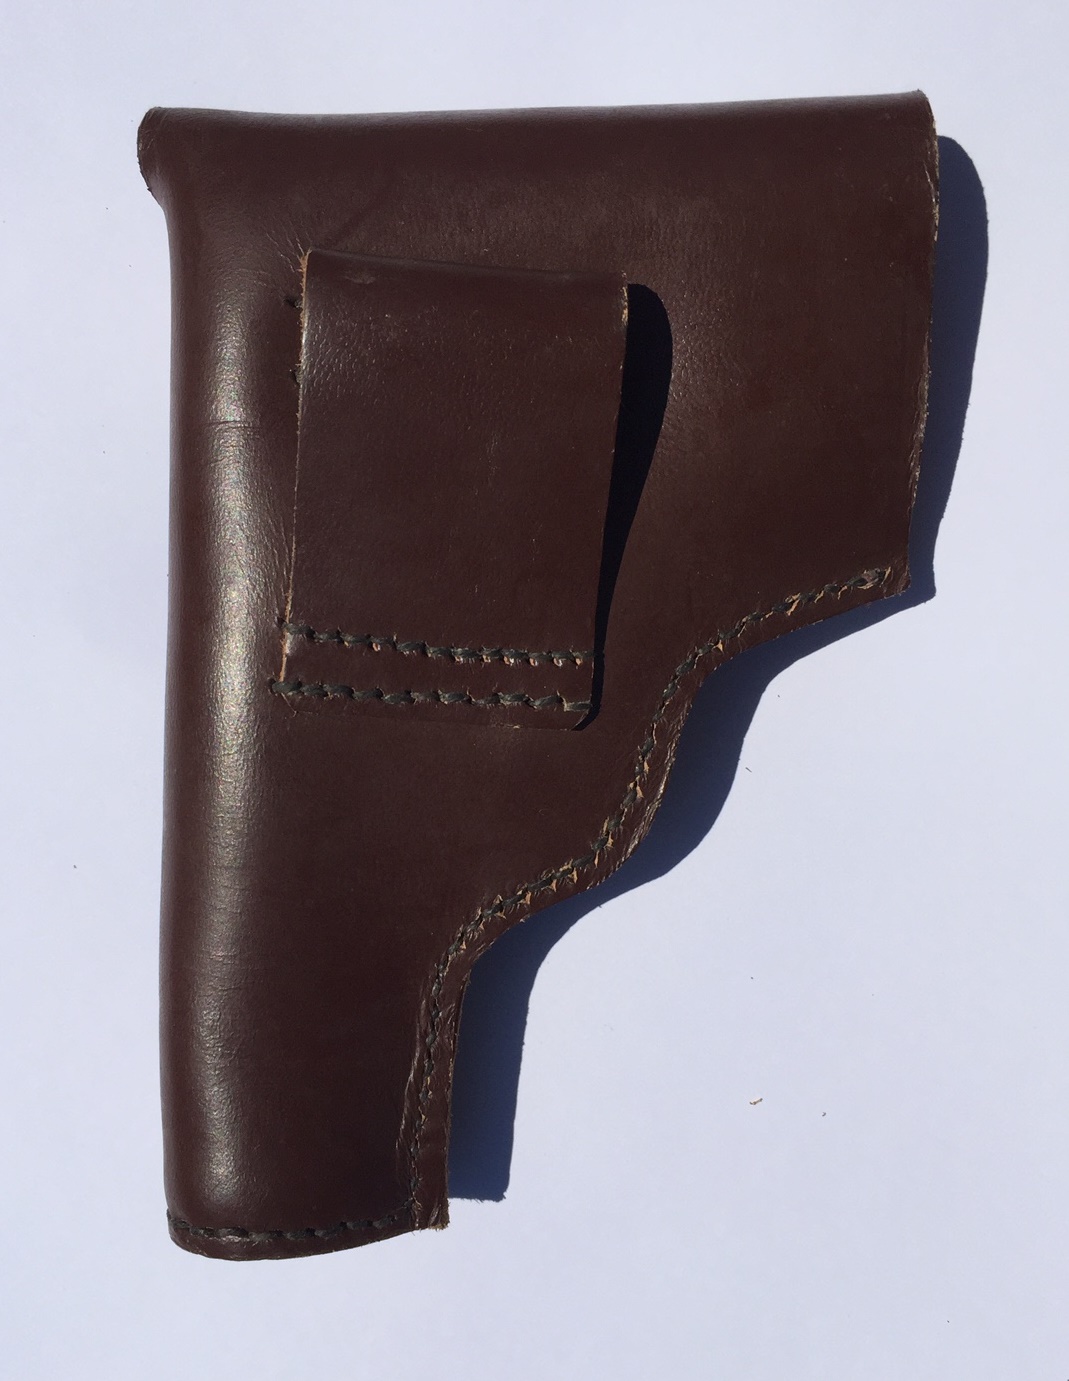 Leather Pistol Holster for tools, your mobile or ....